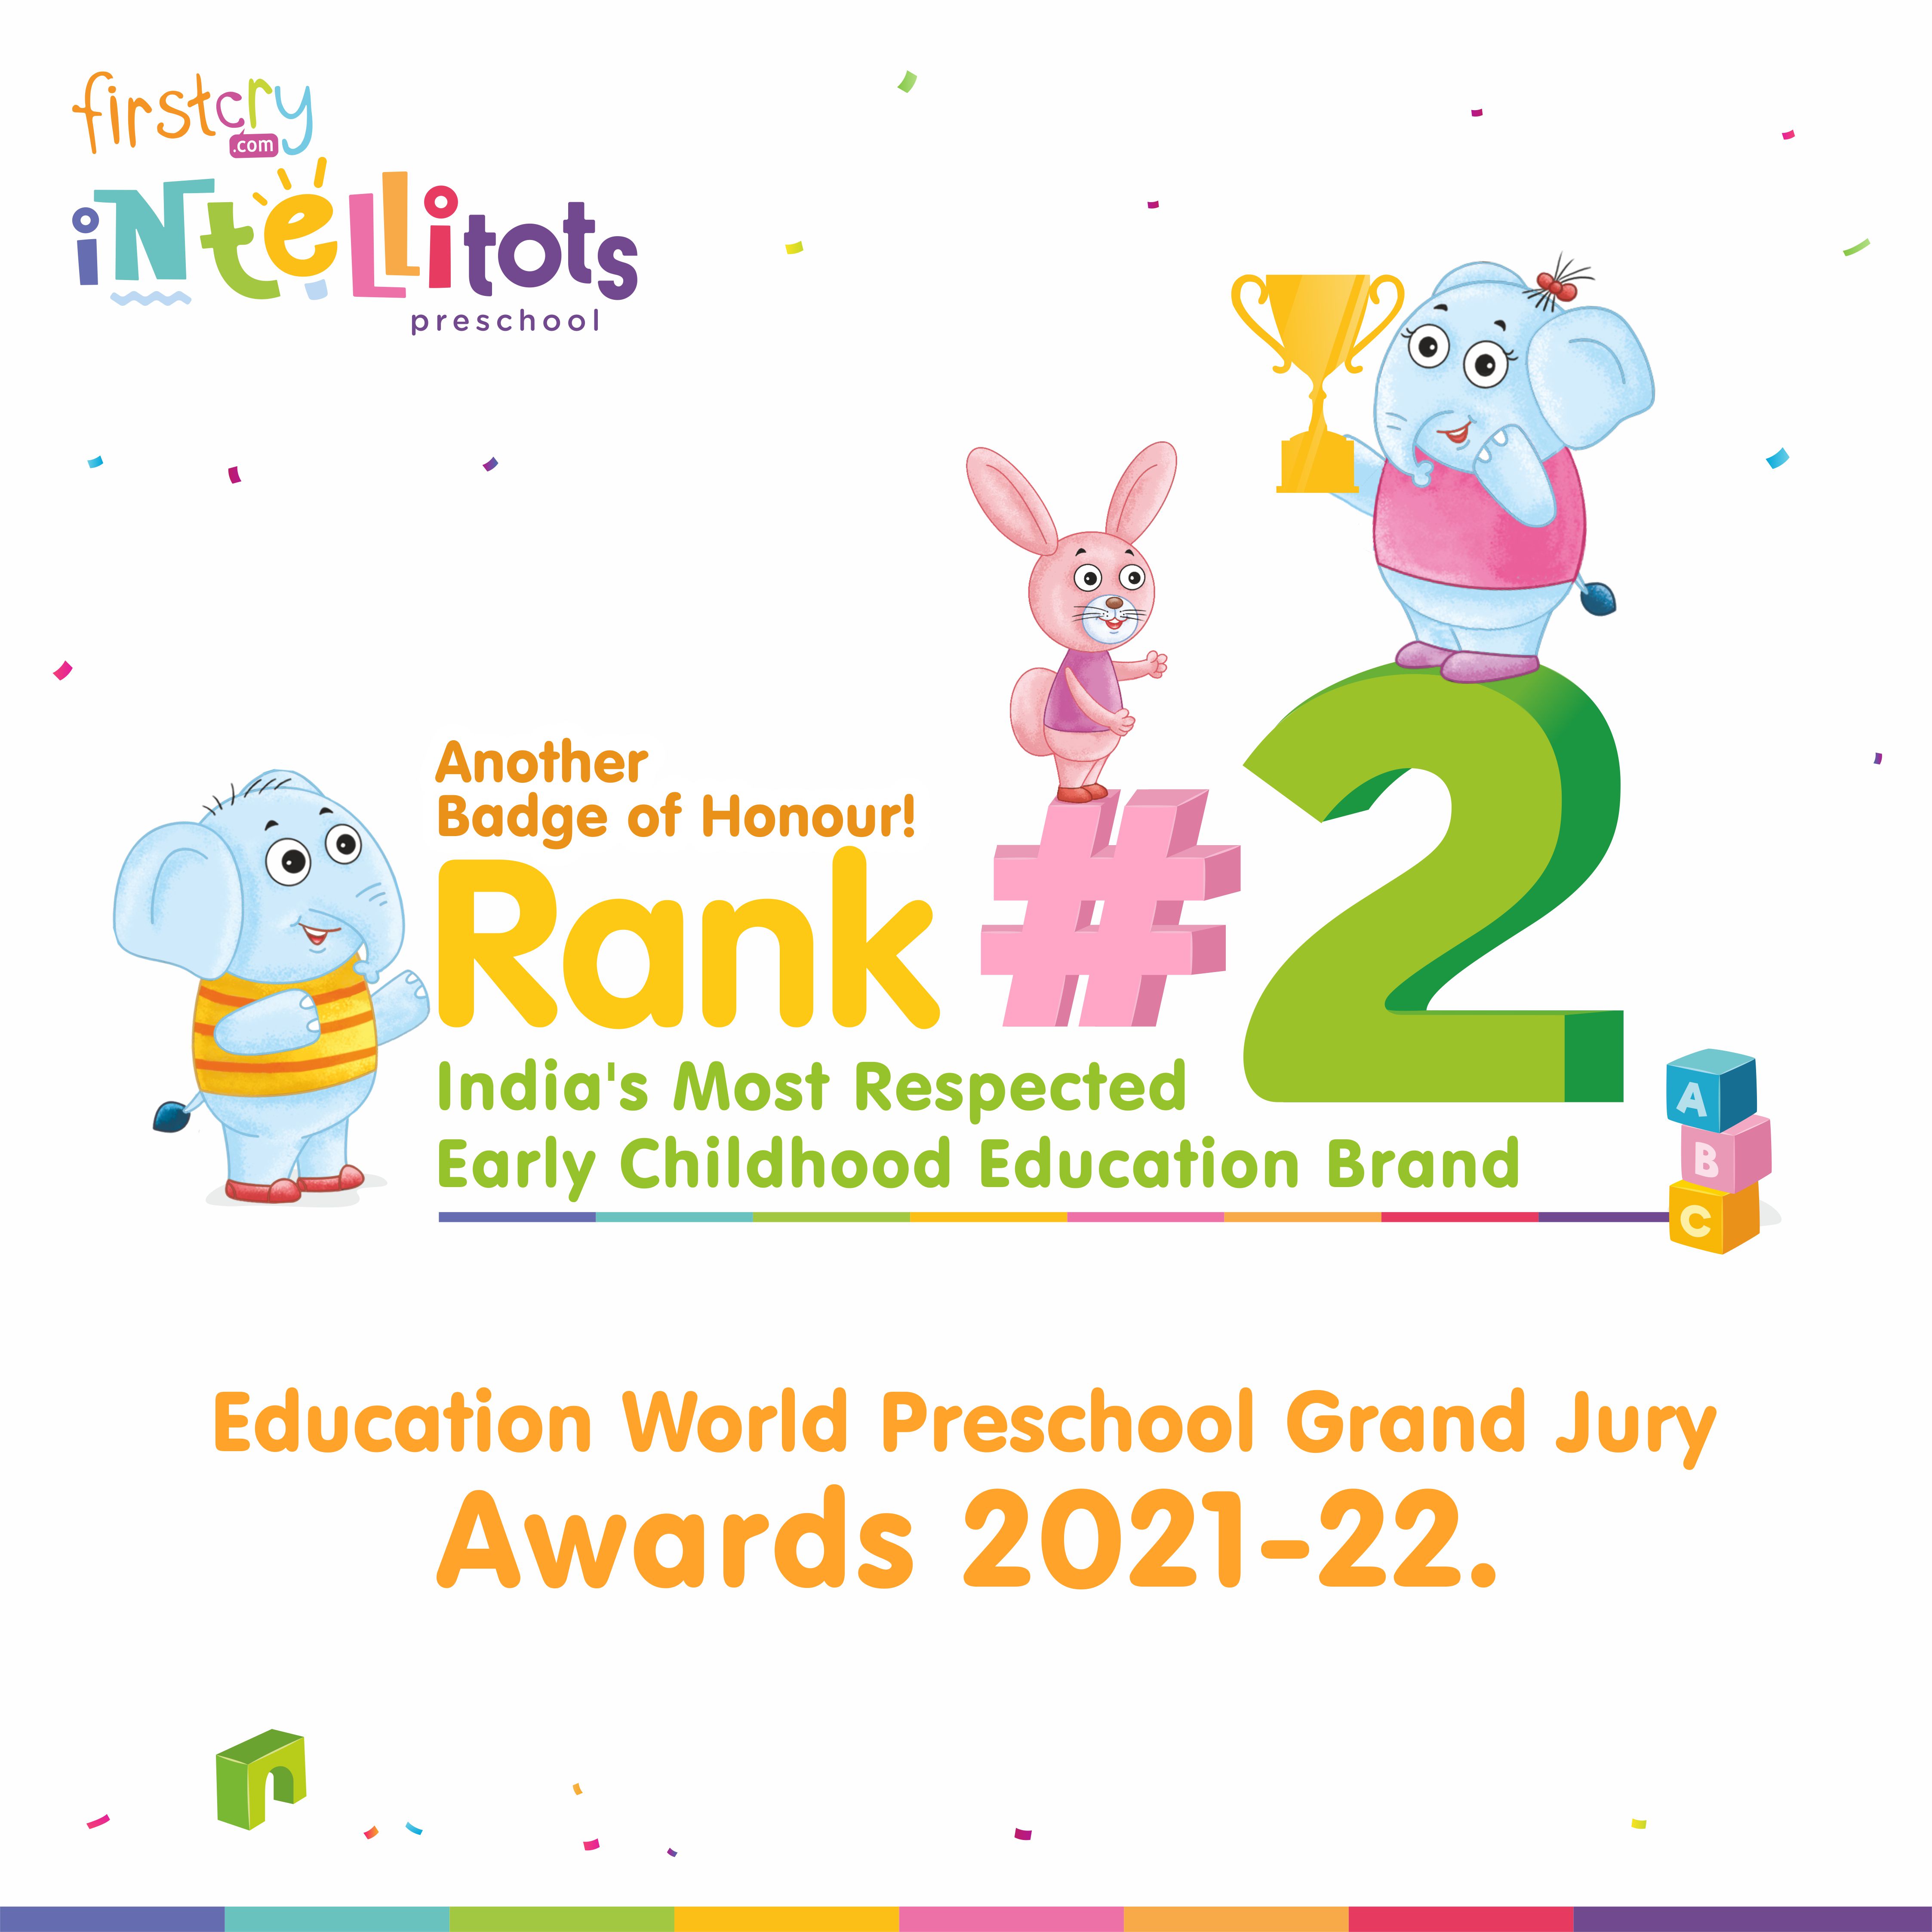 FirstCry Intellitots Preschool, is ranked India’s #2 as India’s Most Respected Early Childhood Education Brand 2020-21